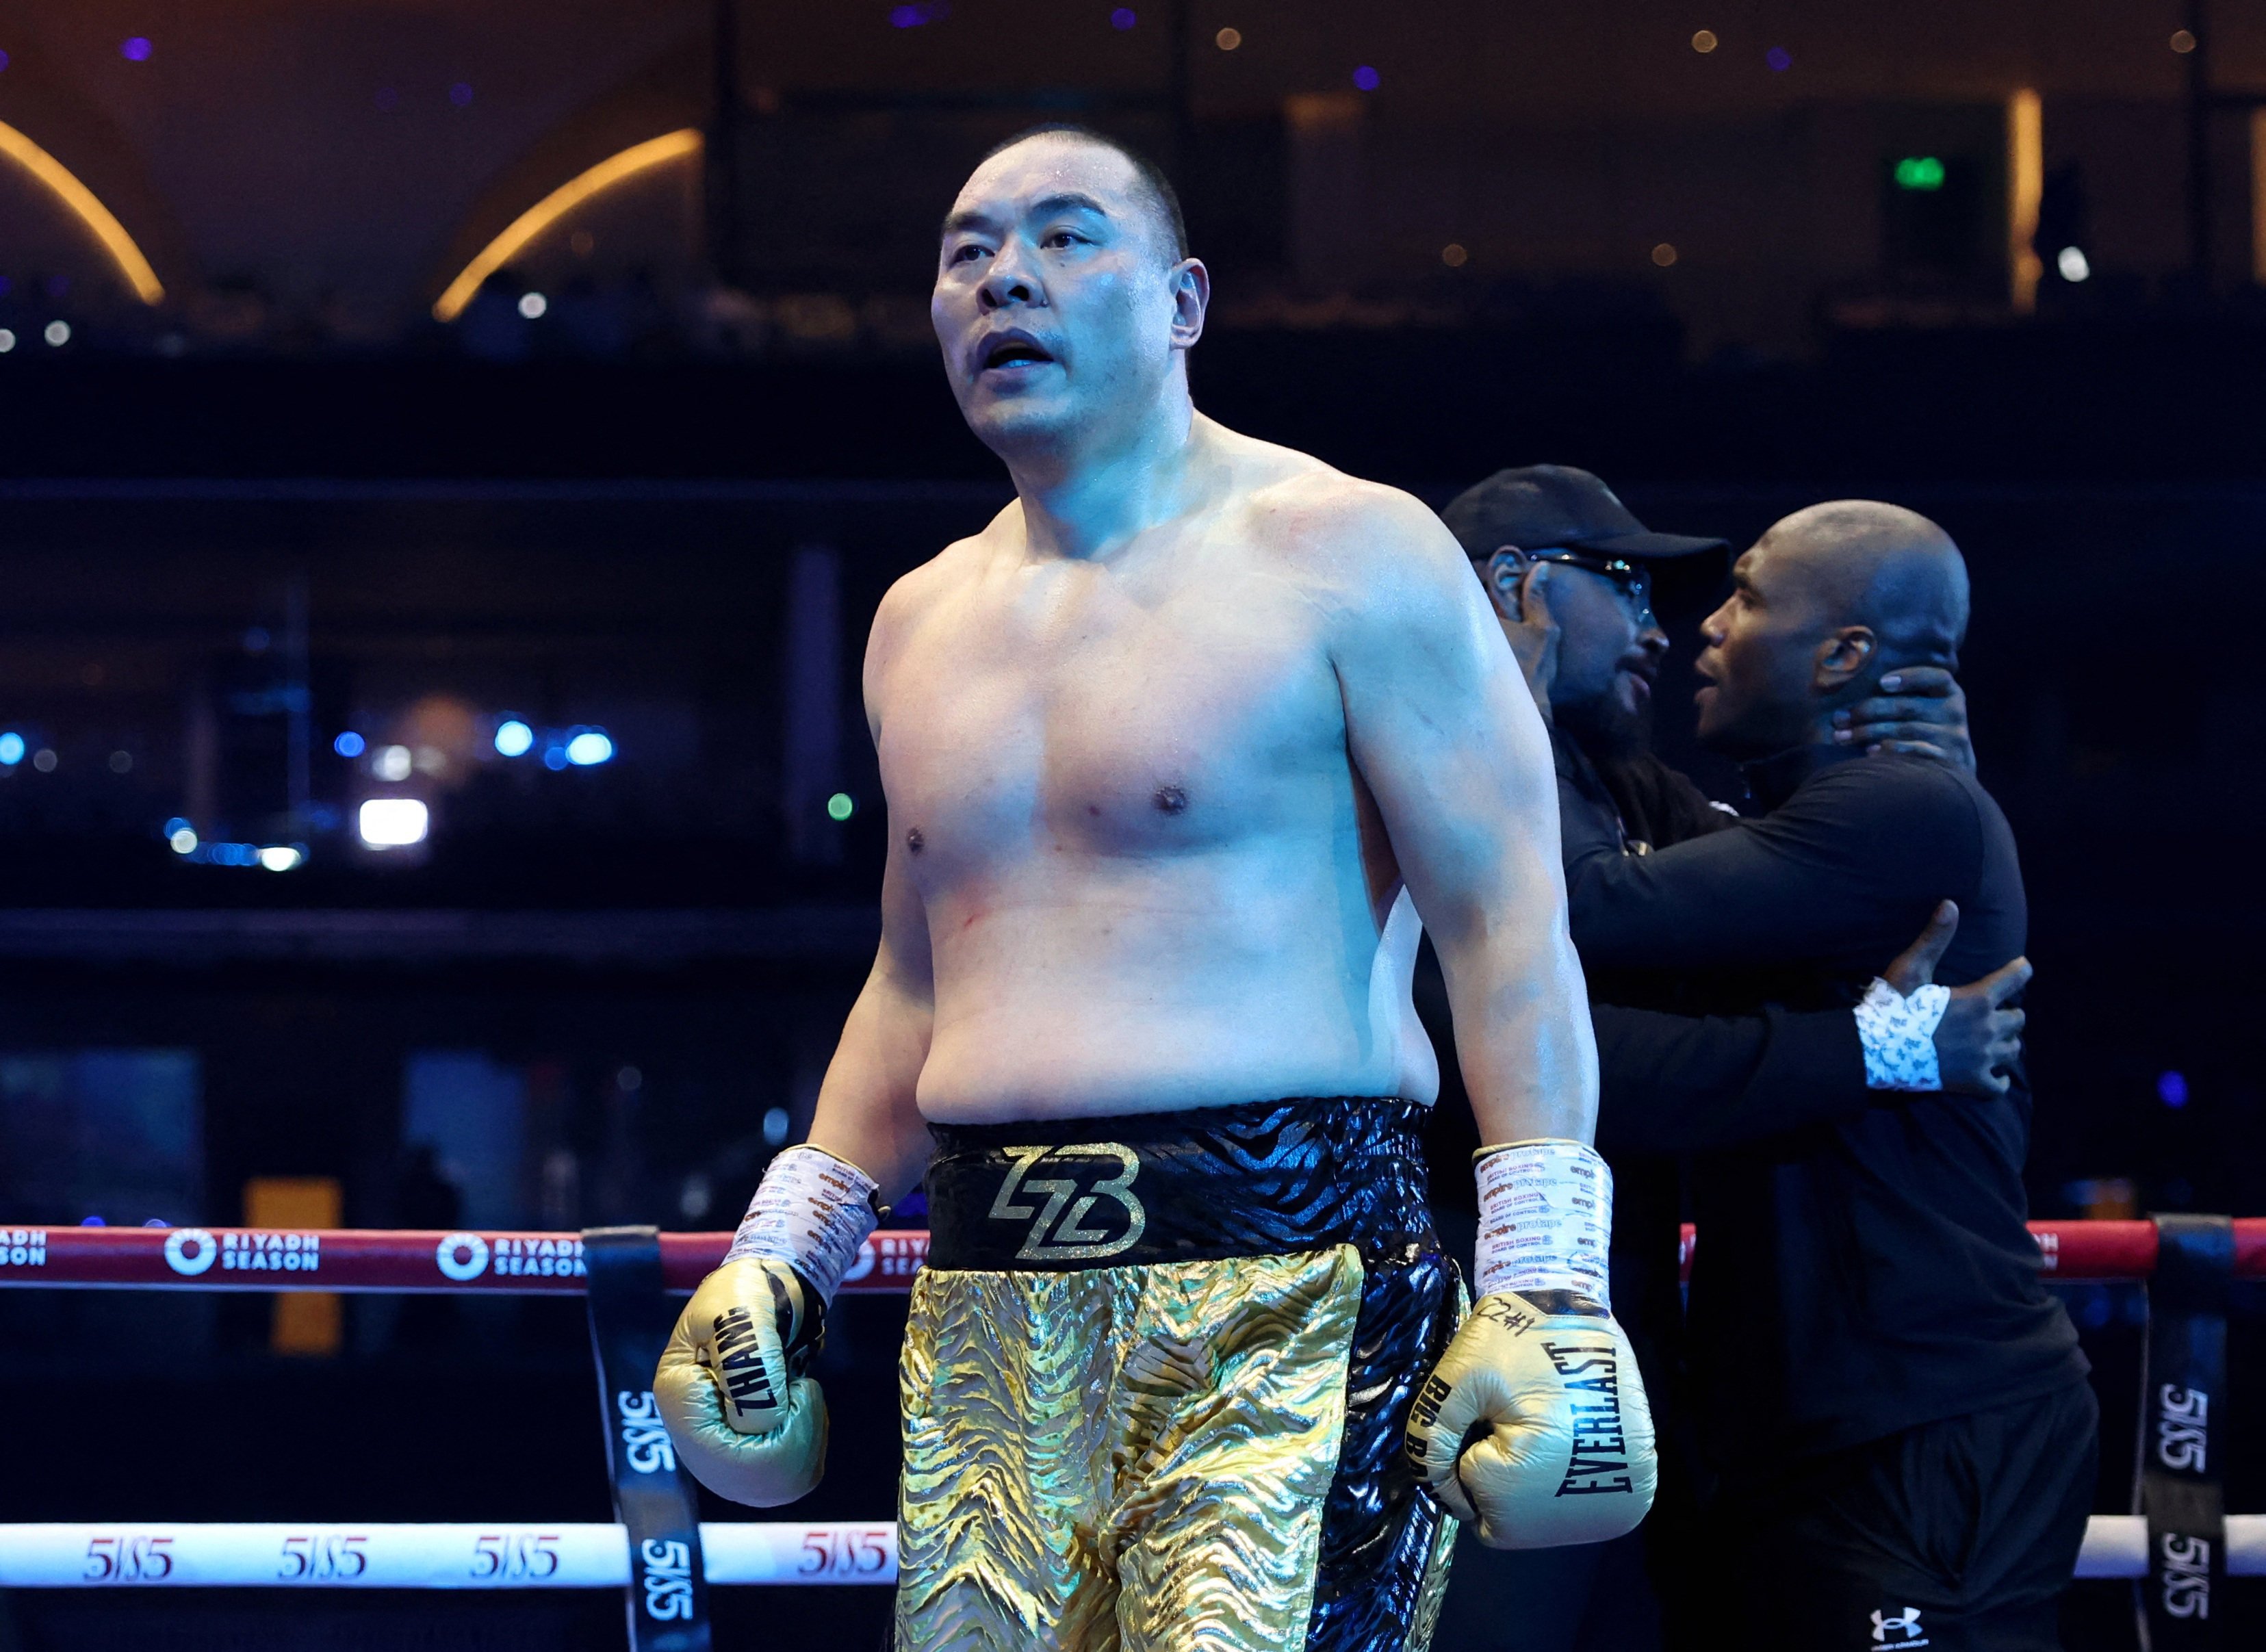 Zhang Zhilei recently delivered a brutal knockout of Deontay Wilder to make the boxing world sit up and take notice. Photo: Xinhua